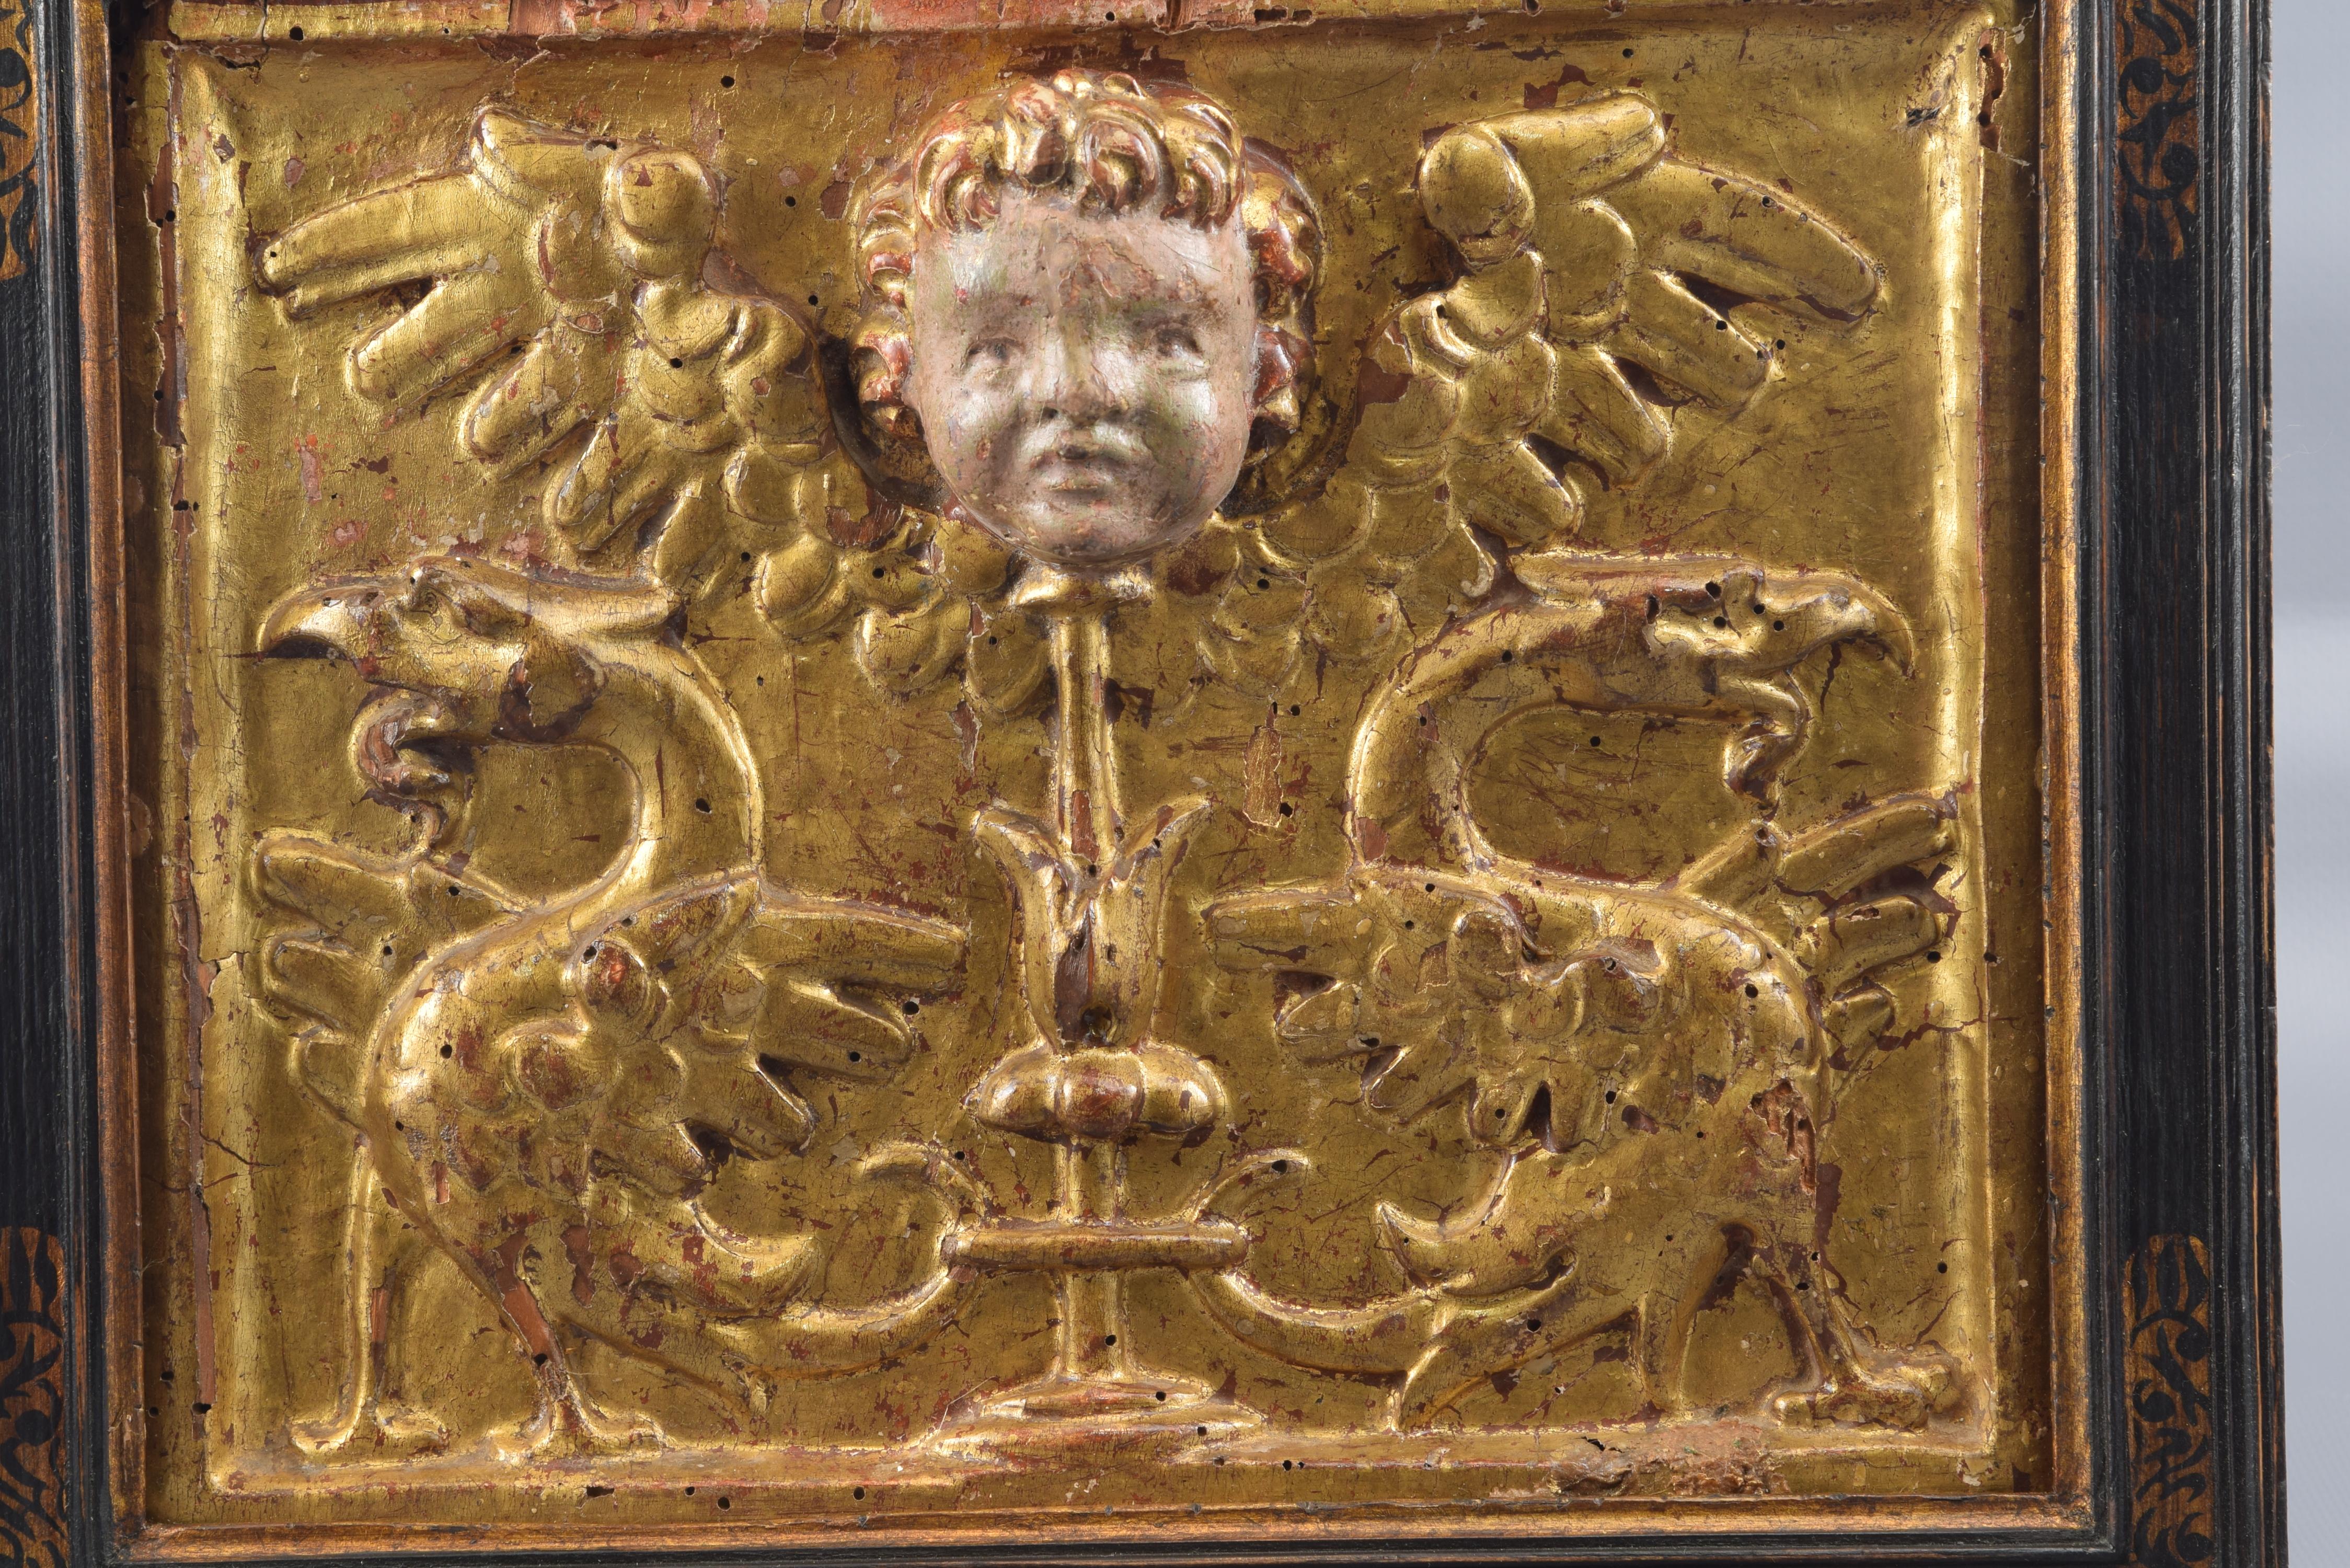 Relief. Carved, polychrome and golden wood, 16th century.
Slightly rectangular wooden plate decorated with a relief on its forehead, made by lowering the way so that “a frame” is left on the table that serves as the basis for the work. It is